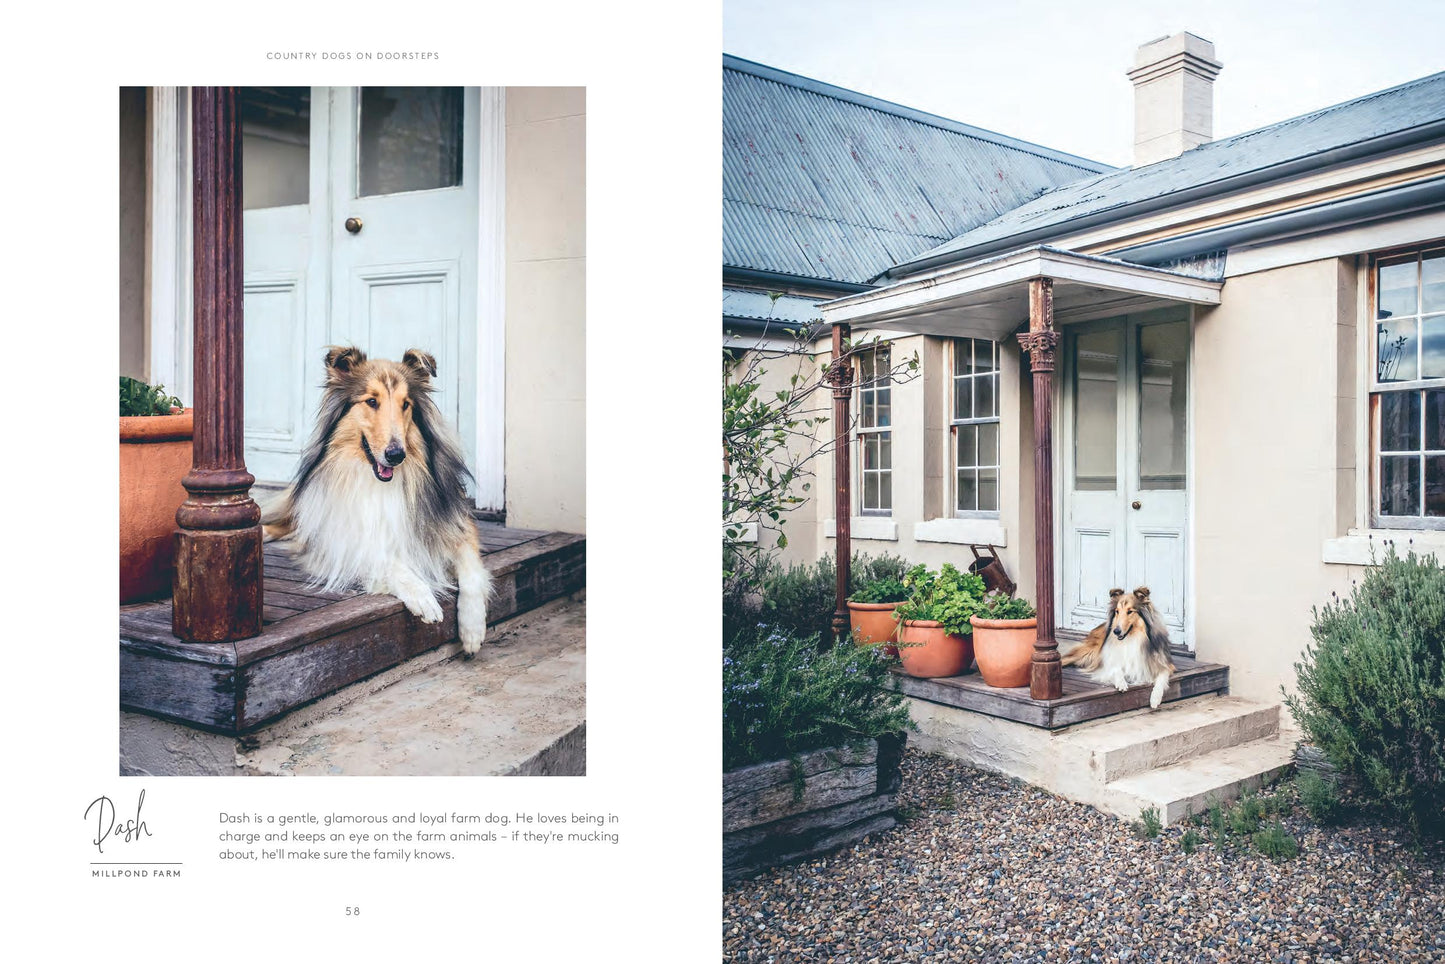 Country Dogs On Doorsteps